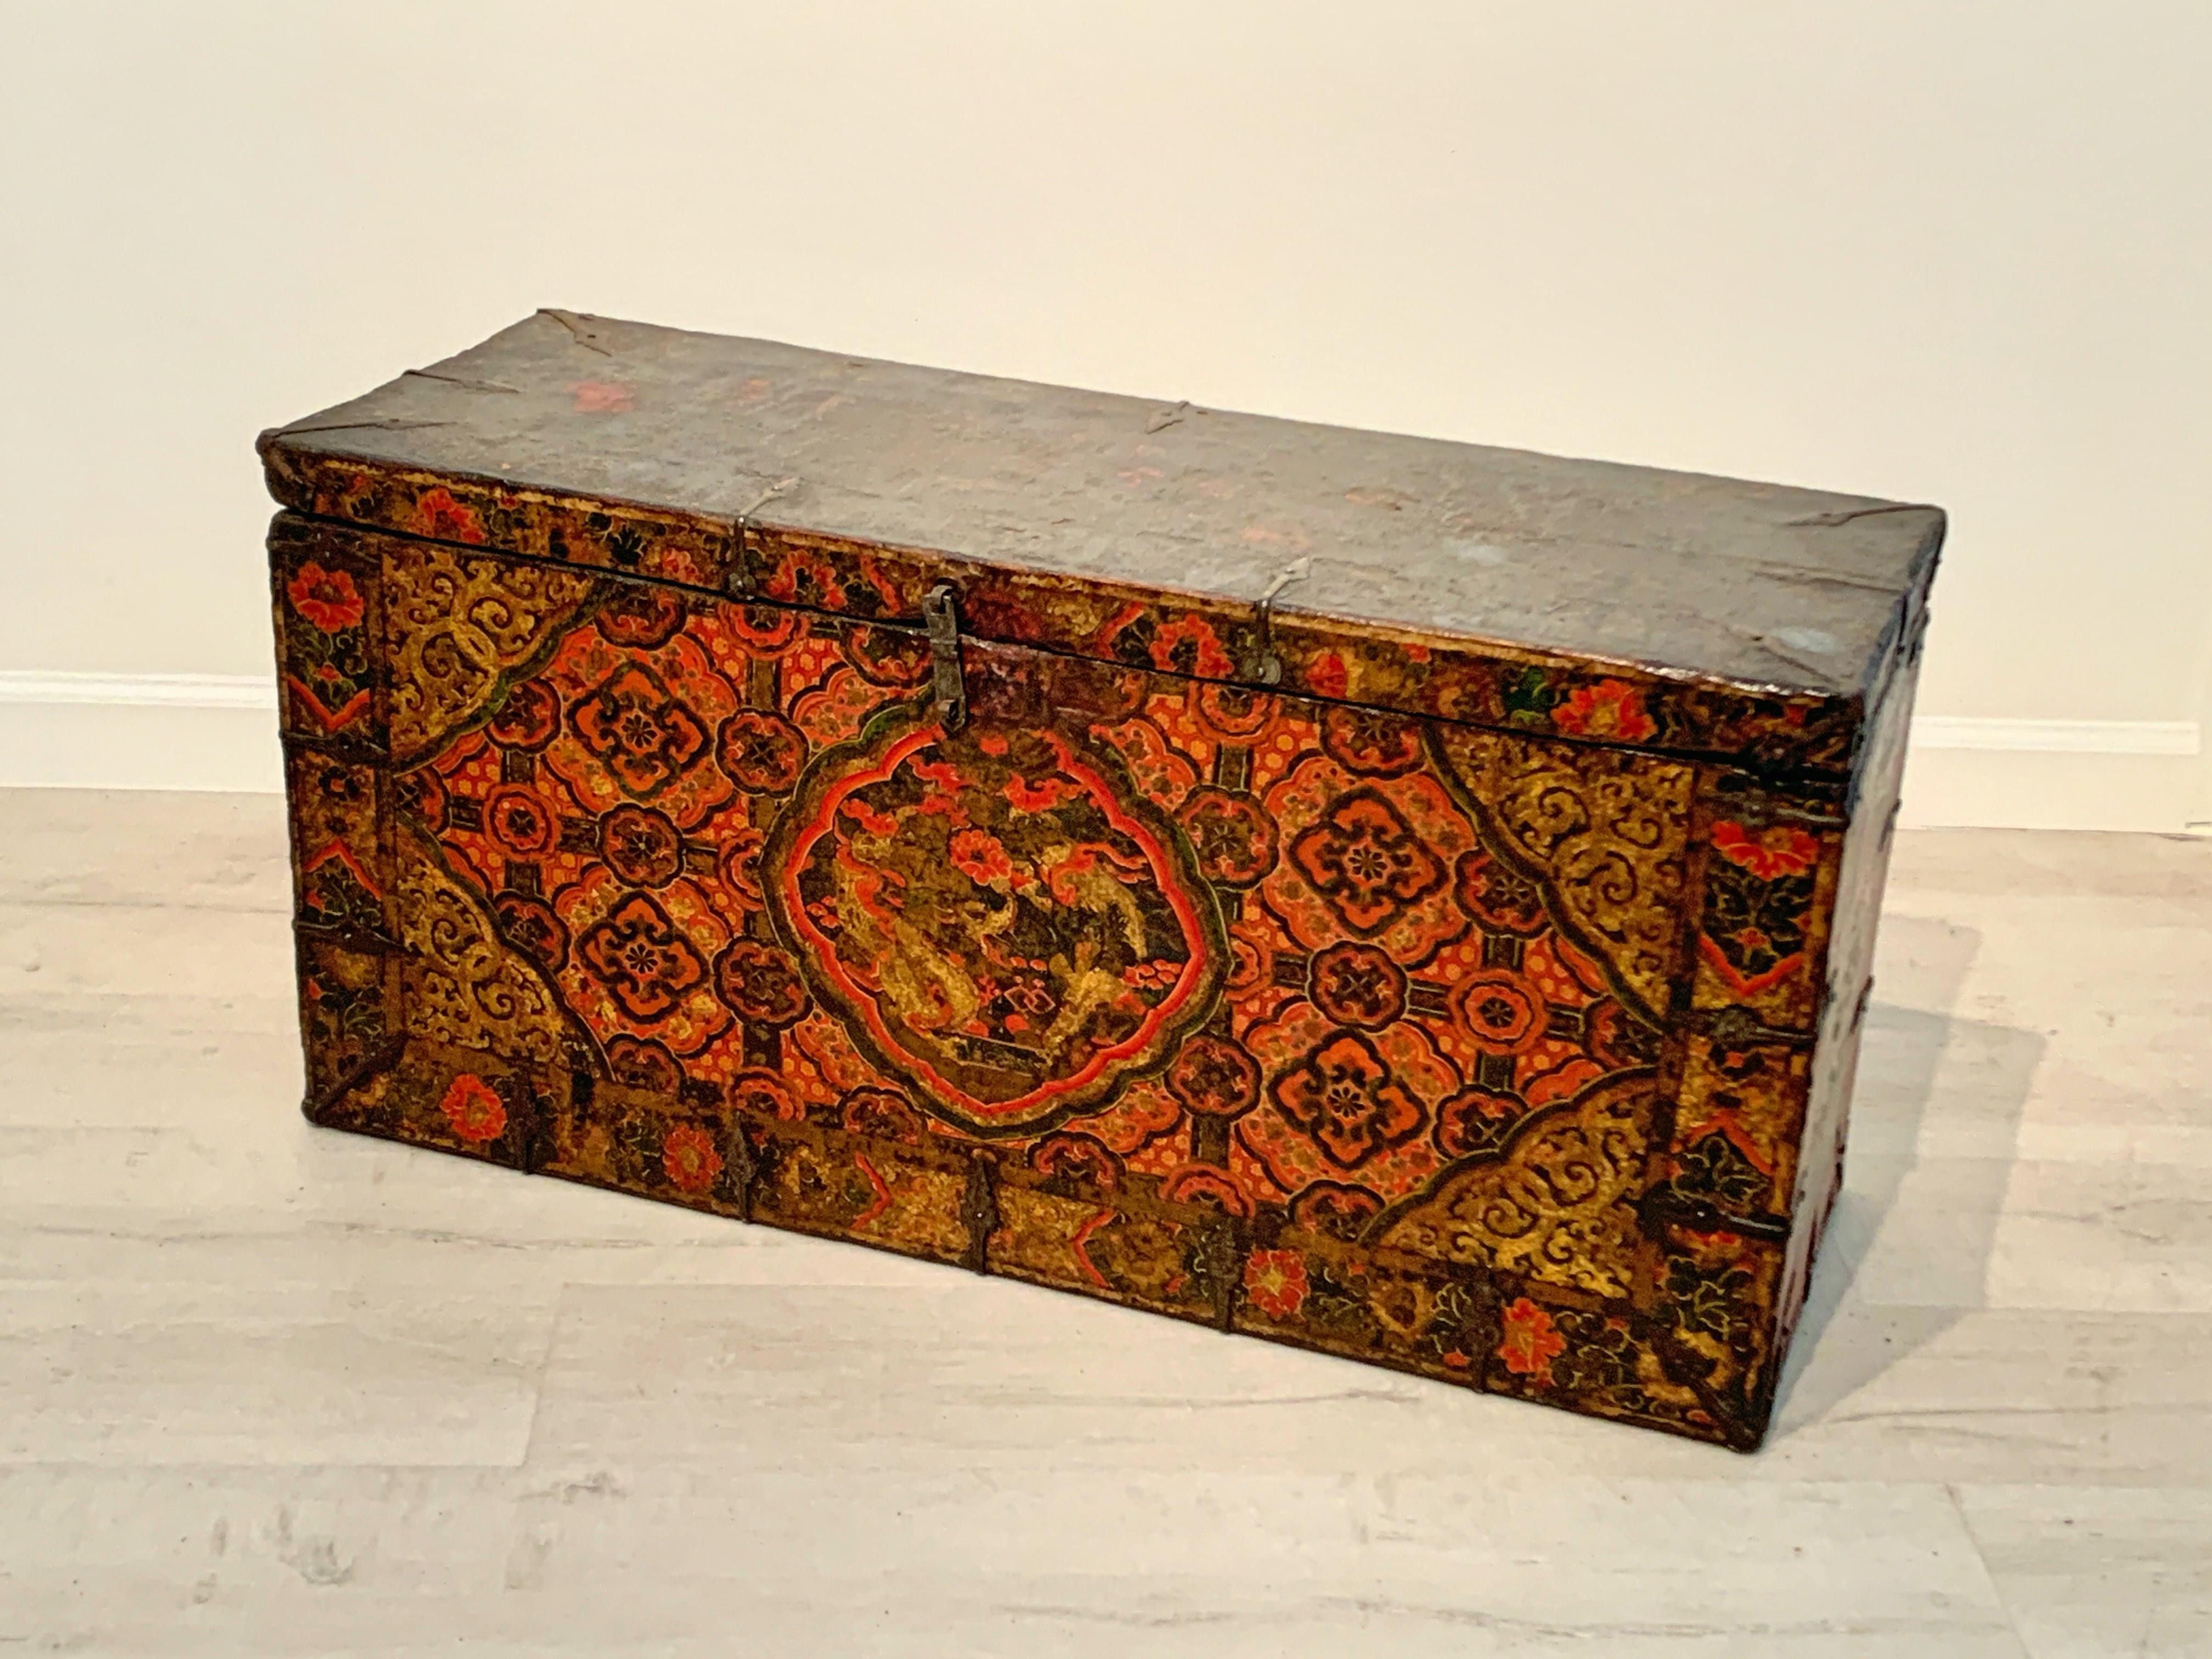 Iron Tibetan Painted Trunk with Dragon and Brocade Design, 17th-18th Century, Tibet